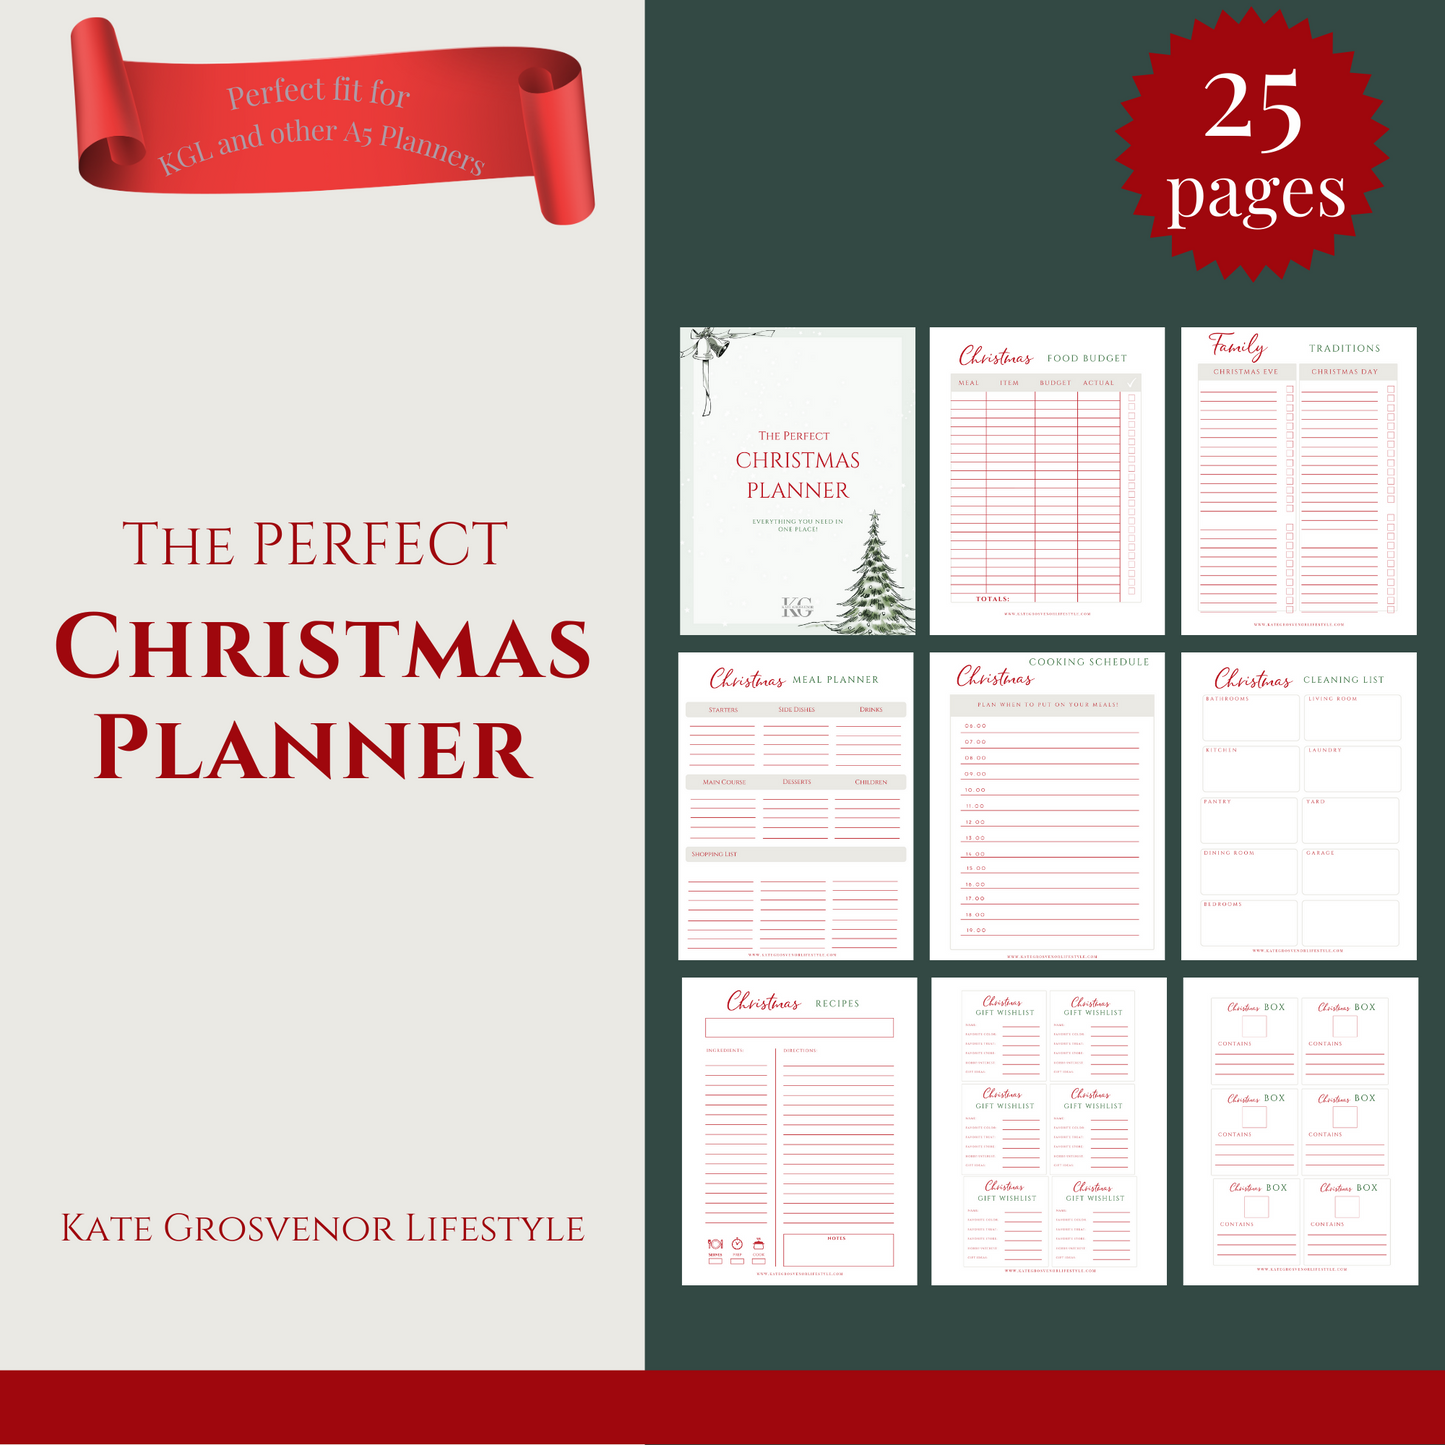 The Perfect Christmas Planner